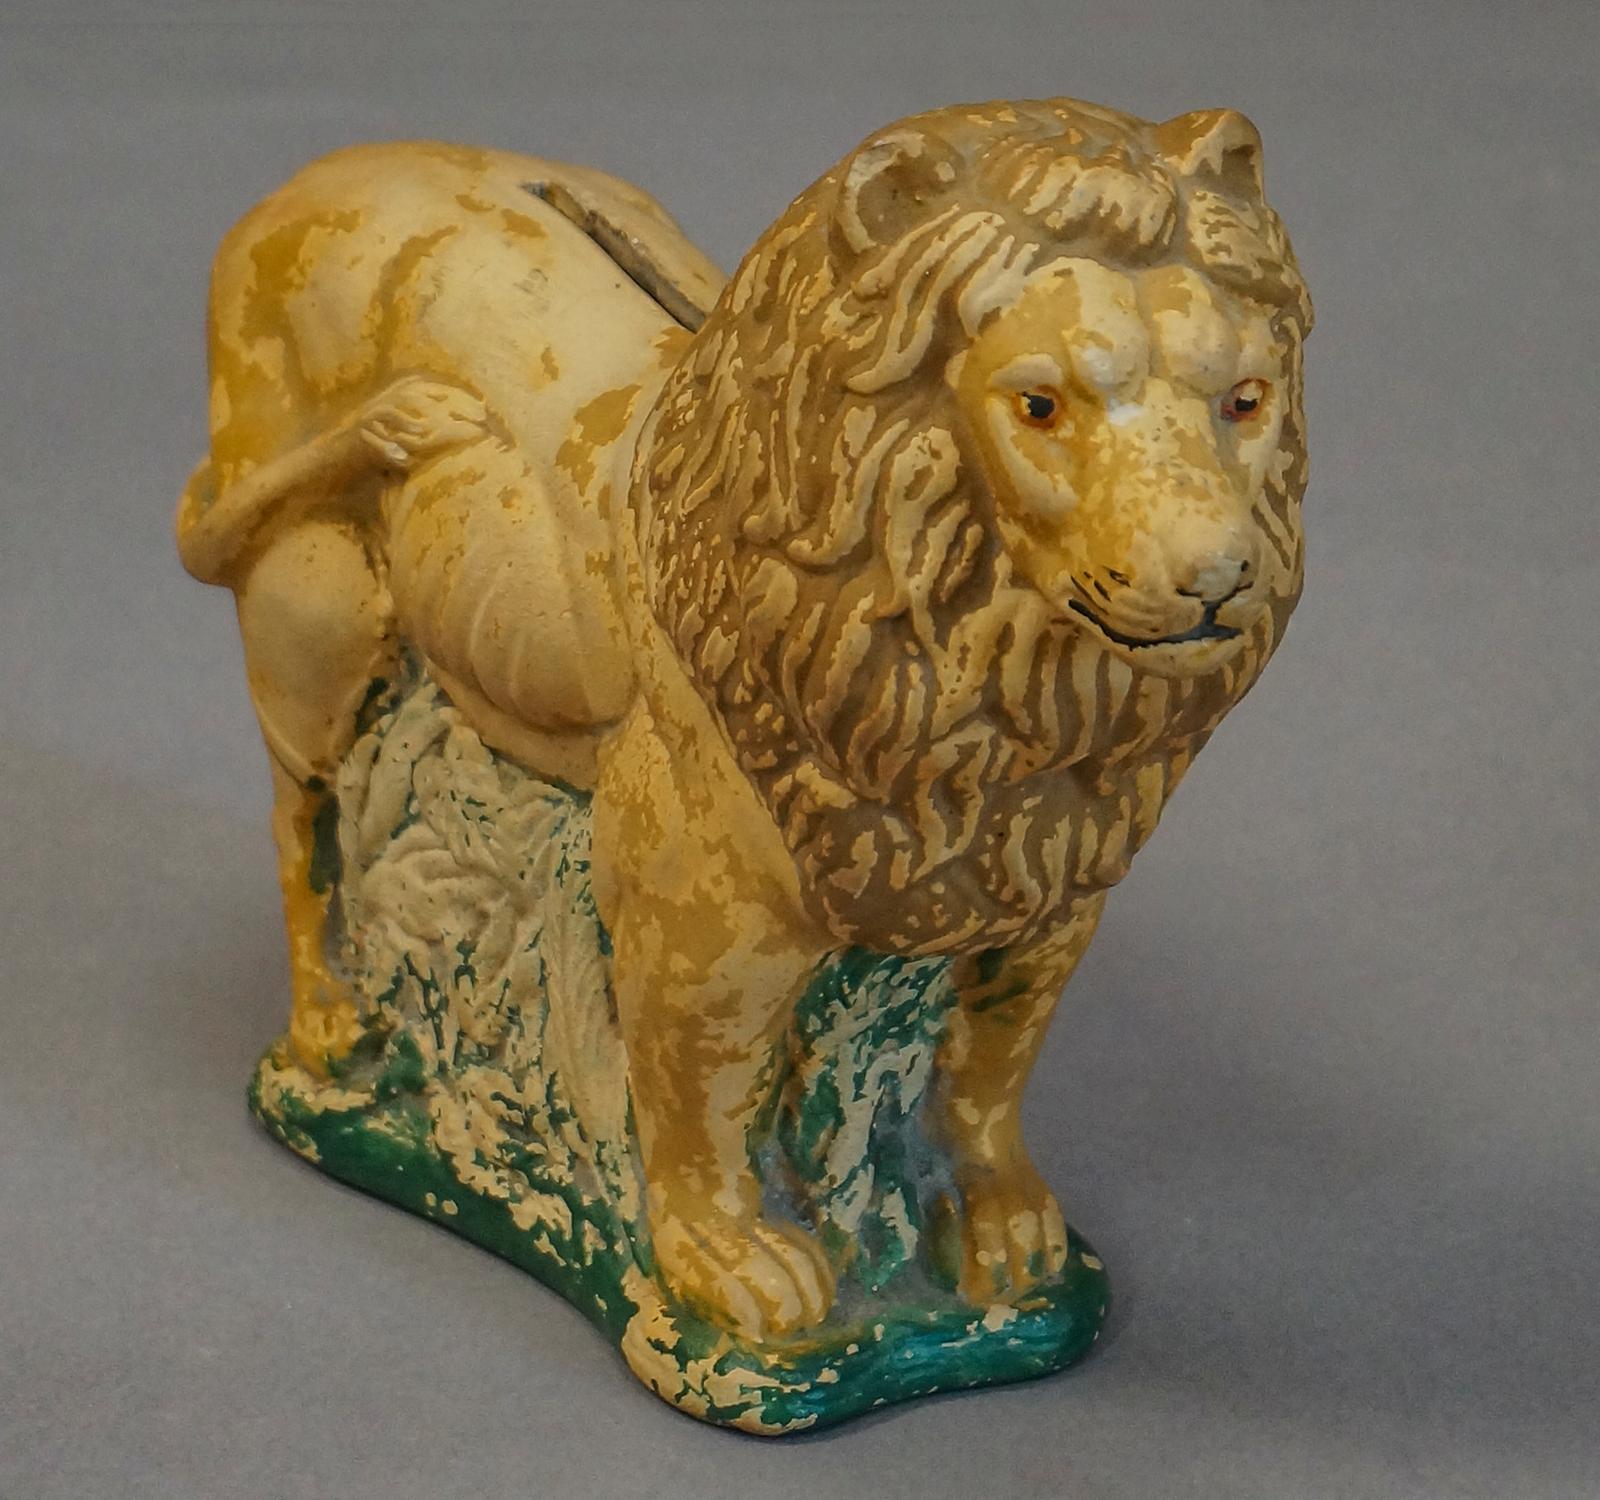 Ceramic coin bank in the form of a lion with a painted green base, Denmark (probably Bornholm), circa 1880. From a private collection.